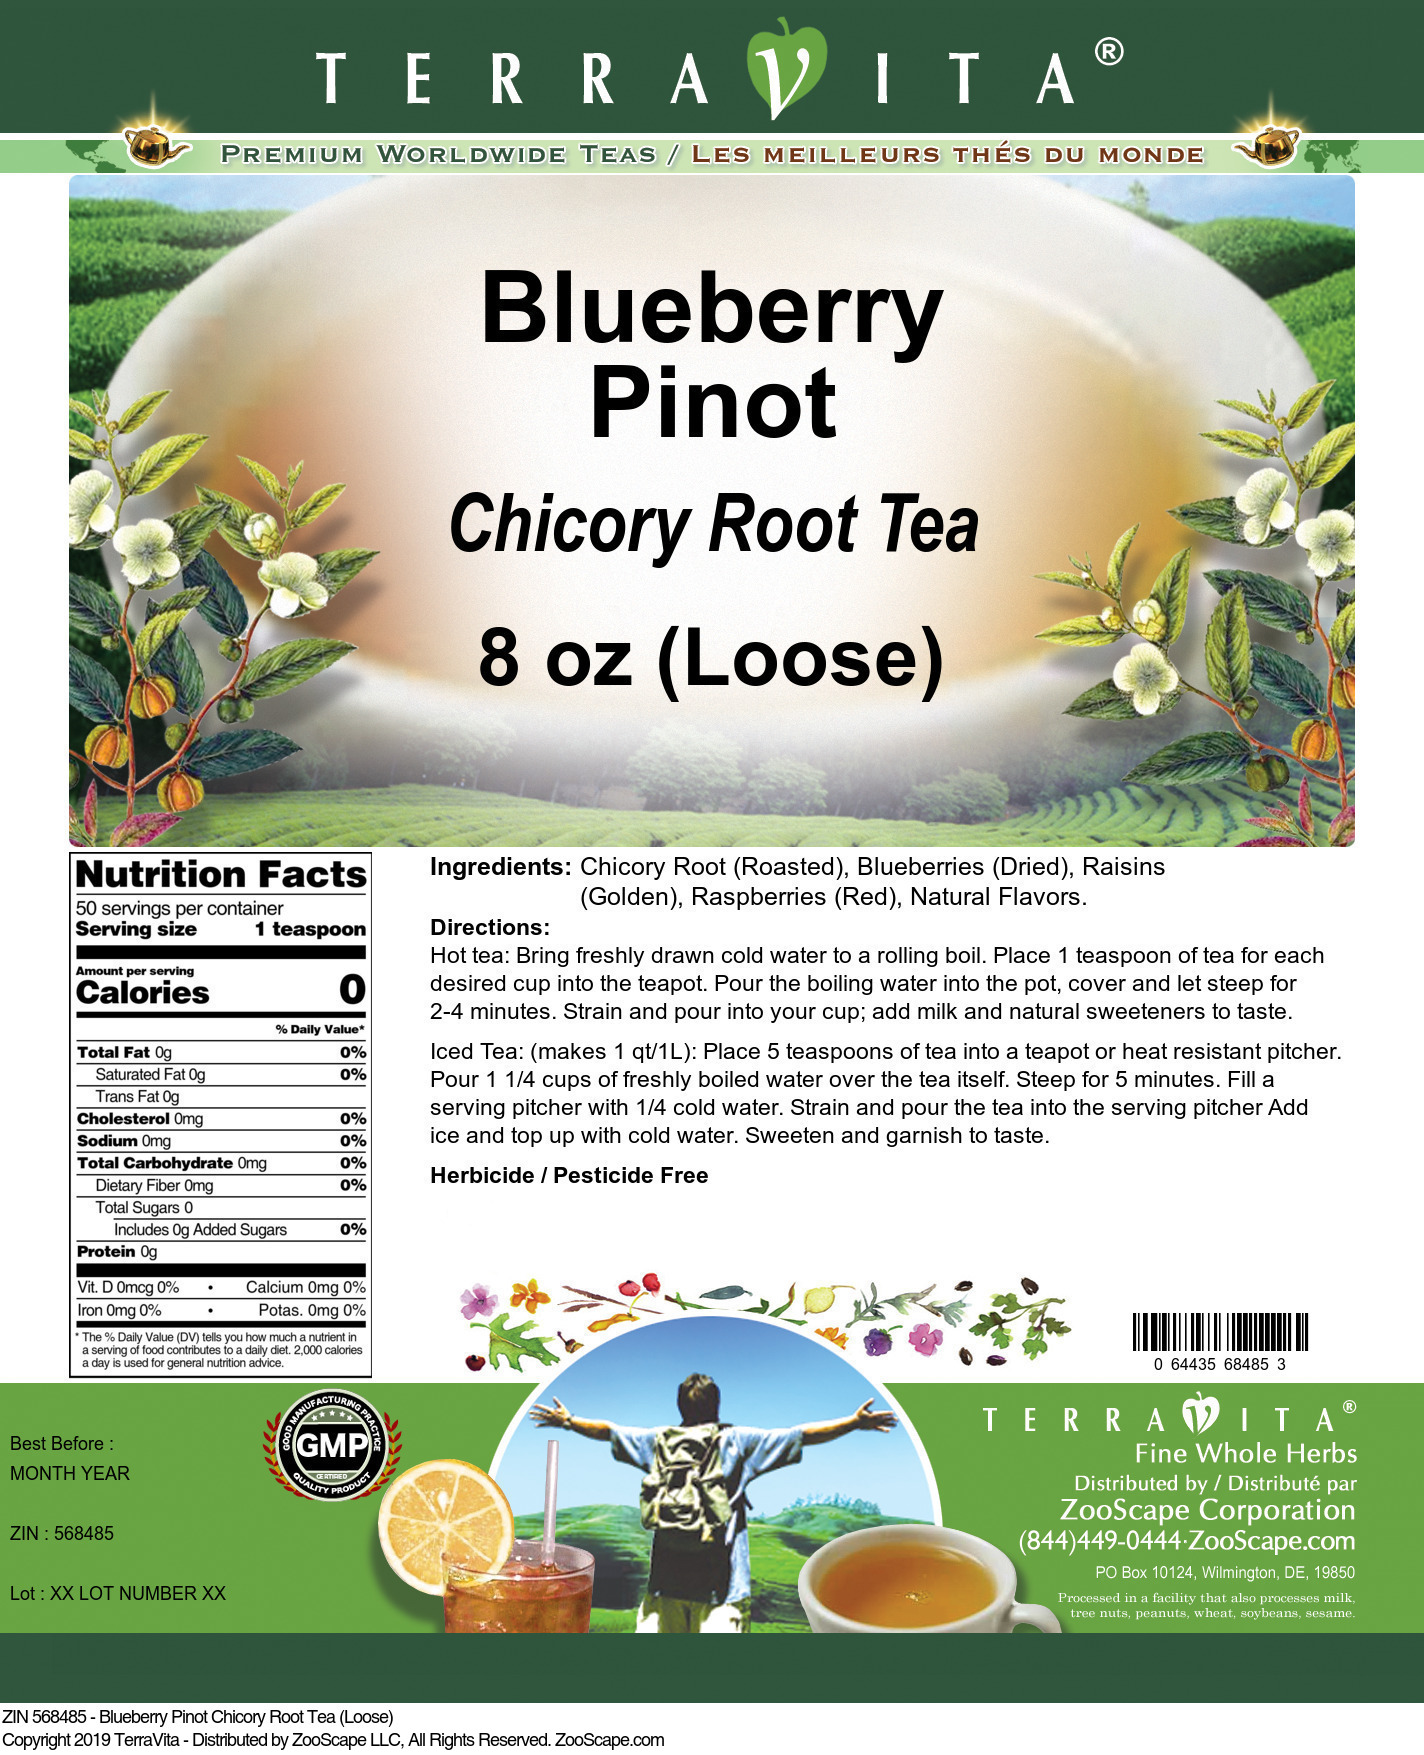 Blueberry Pinot Chicory Root Tea (Loose) - Label